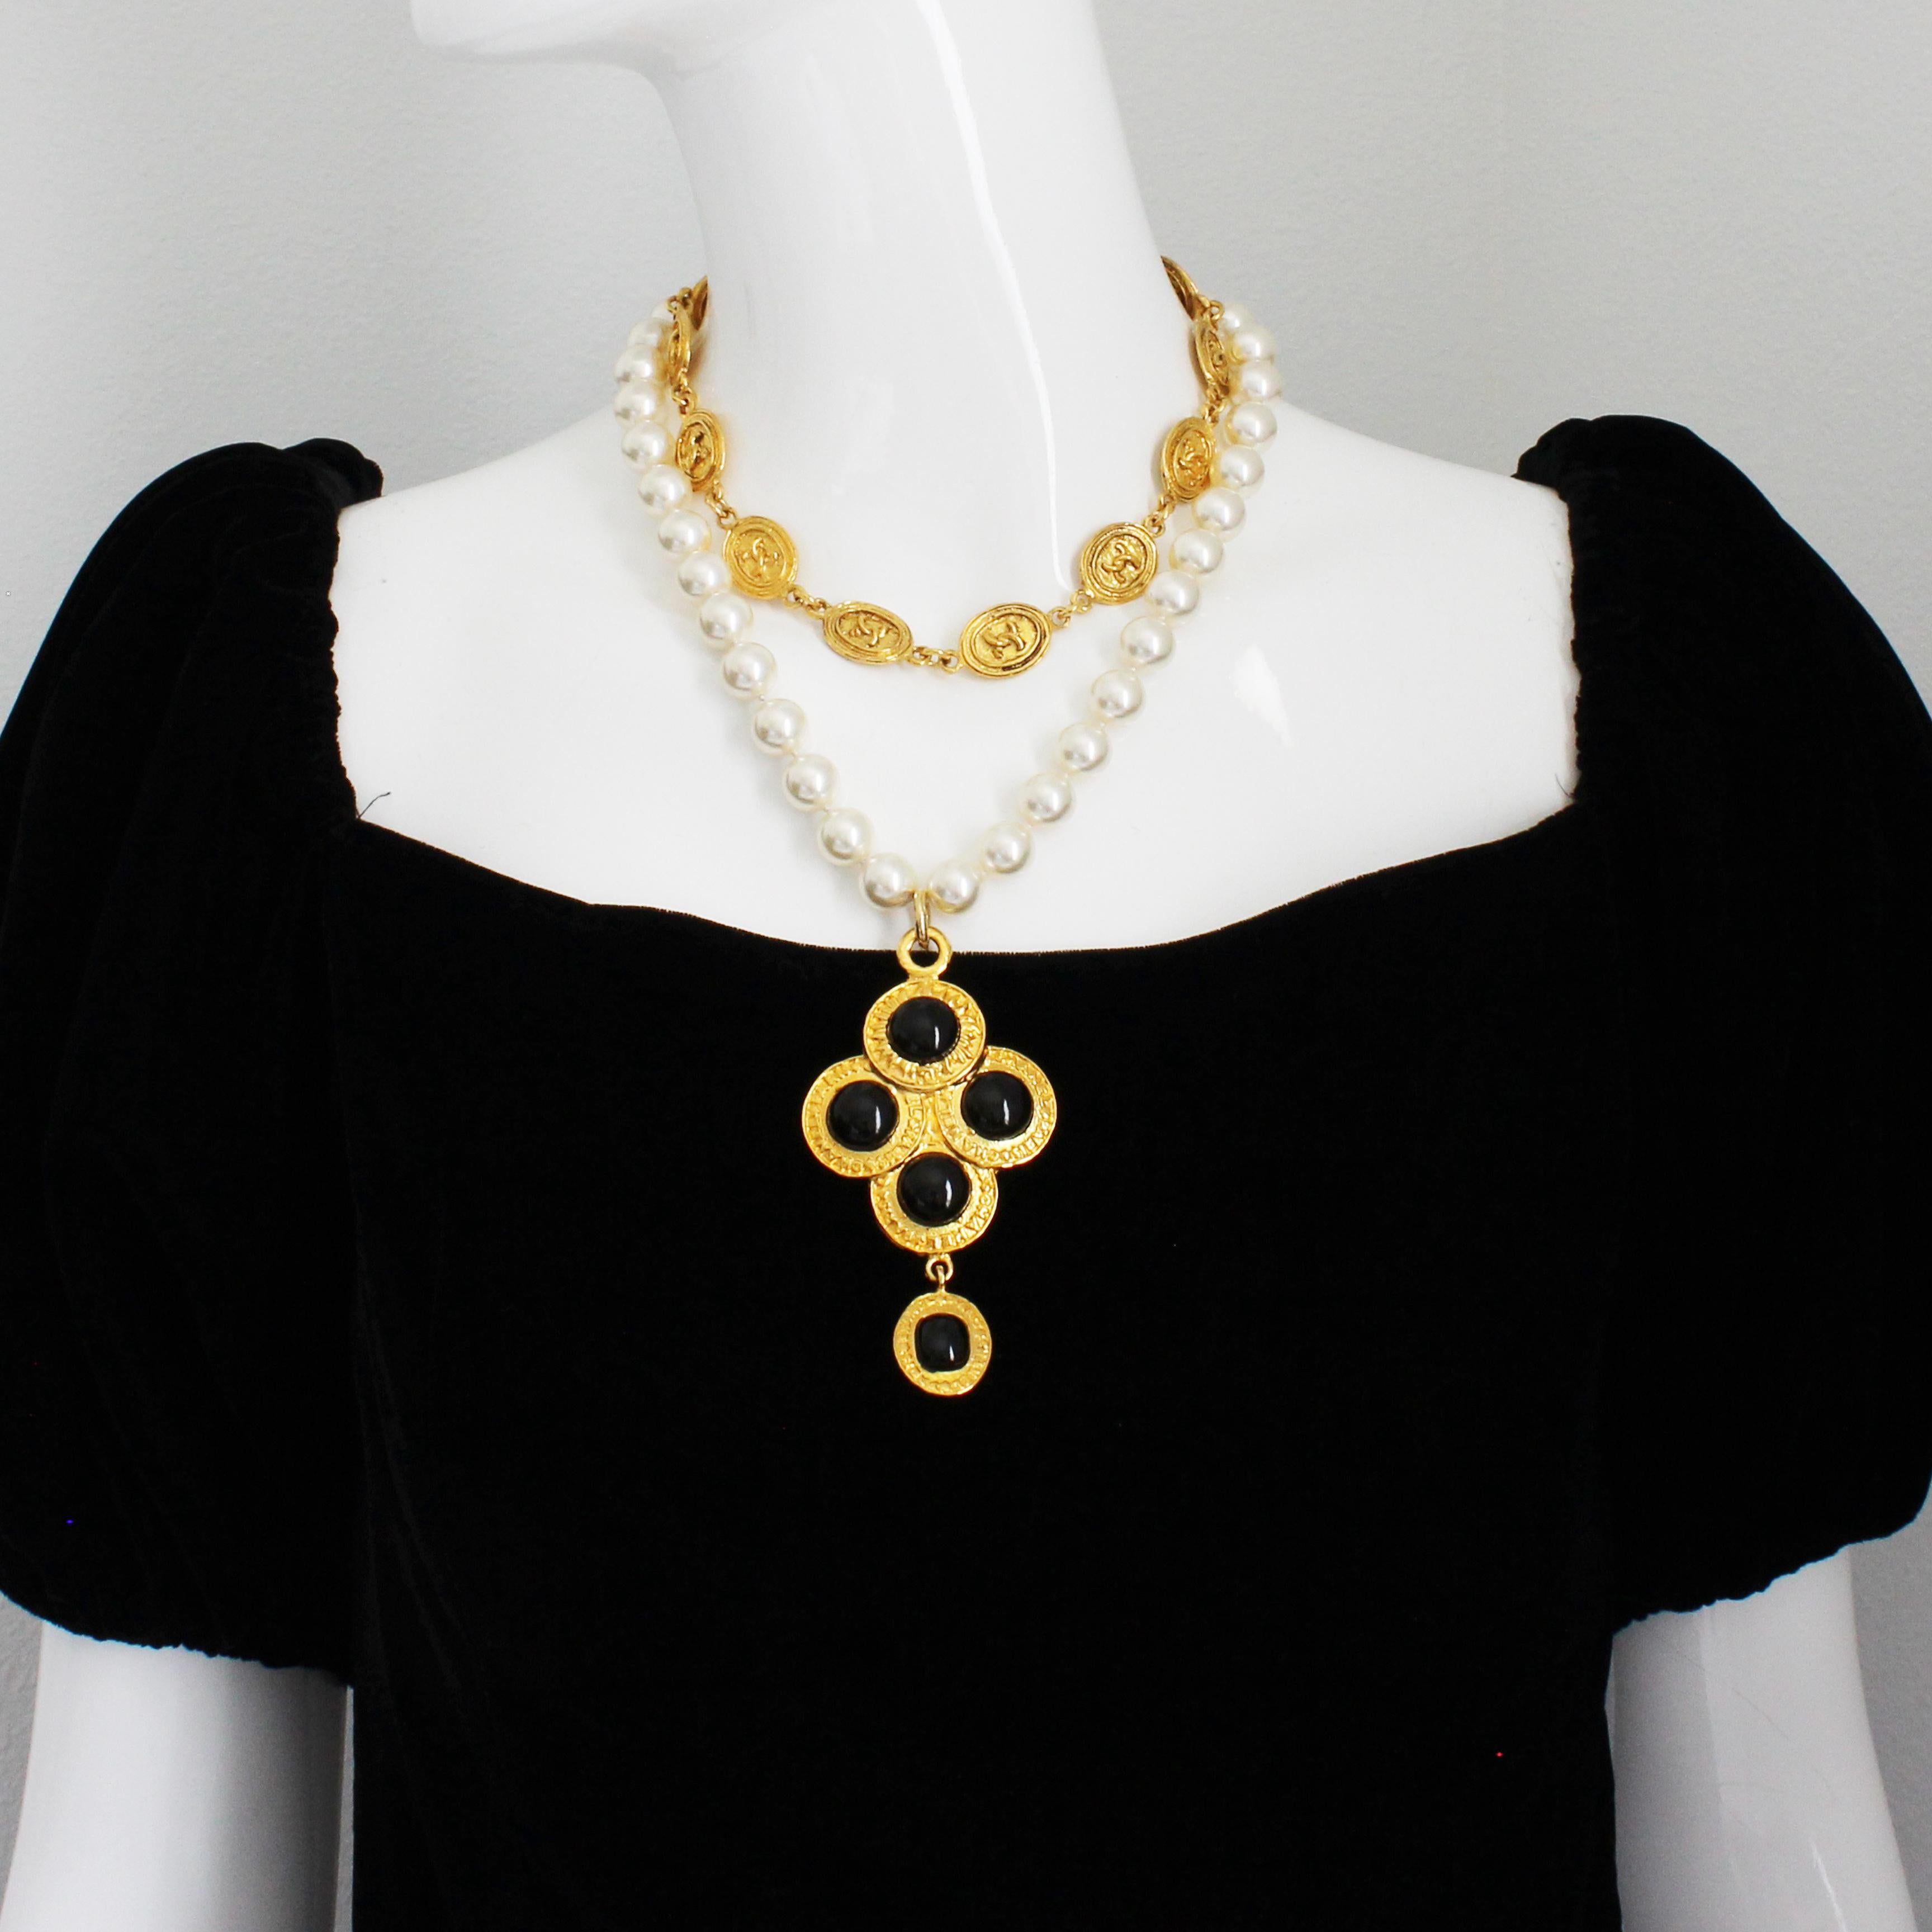 Chanel Necklace Large Medallion Pendant Poured Glass Pearls Vintage 90s + COA In Good Condition For Sale In Port Saint Lucie, FL